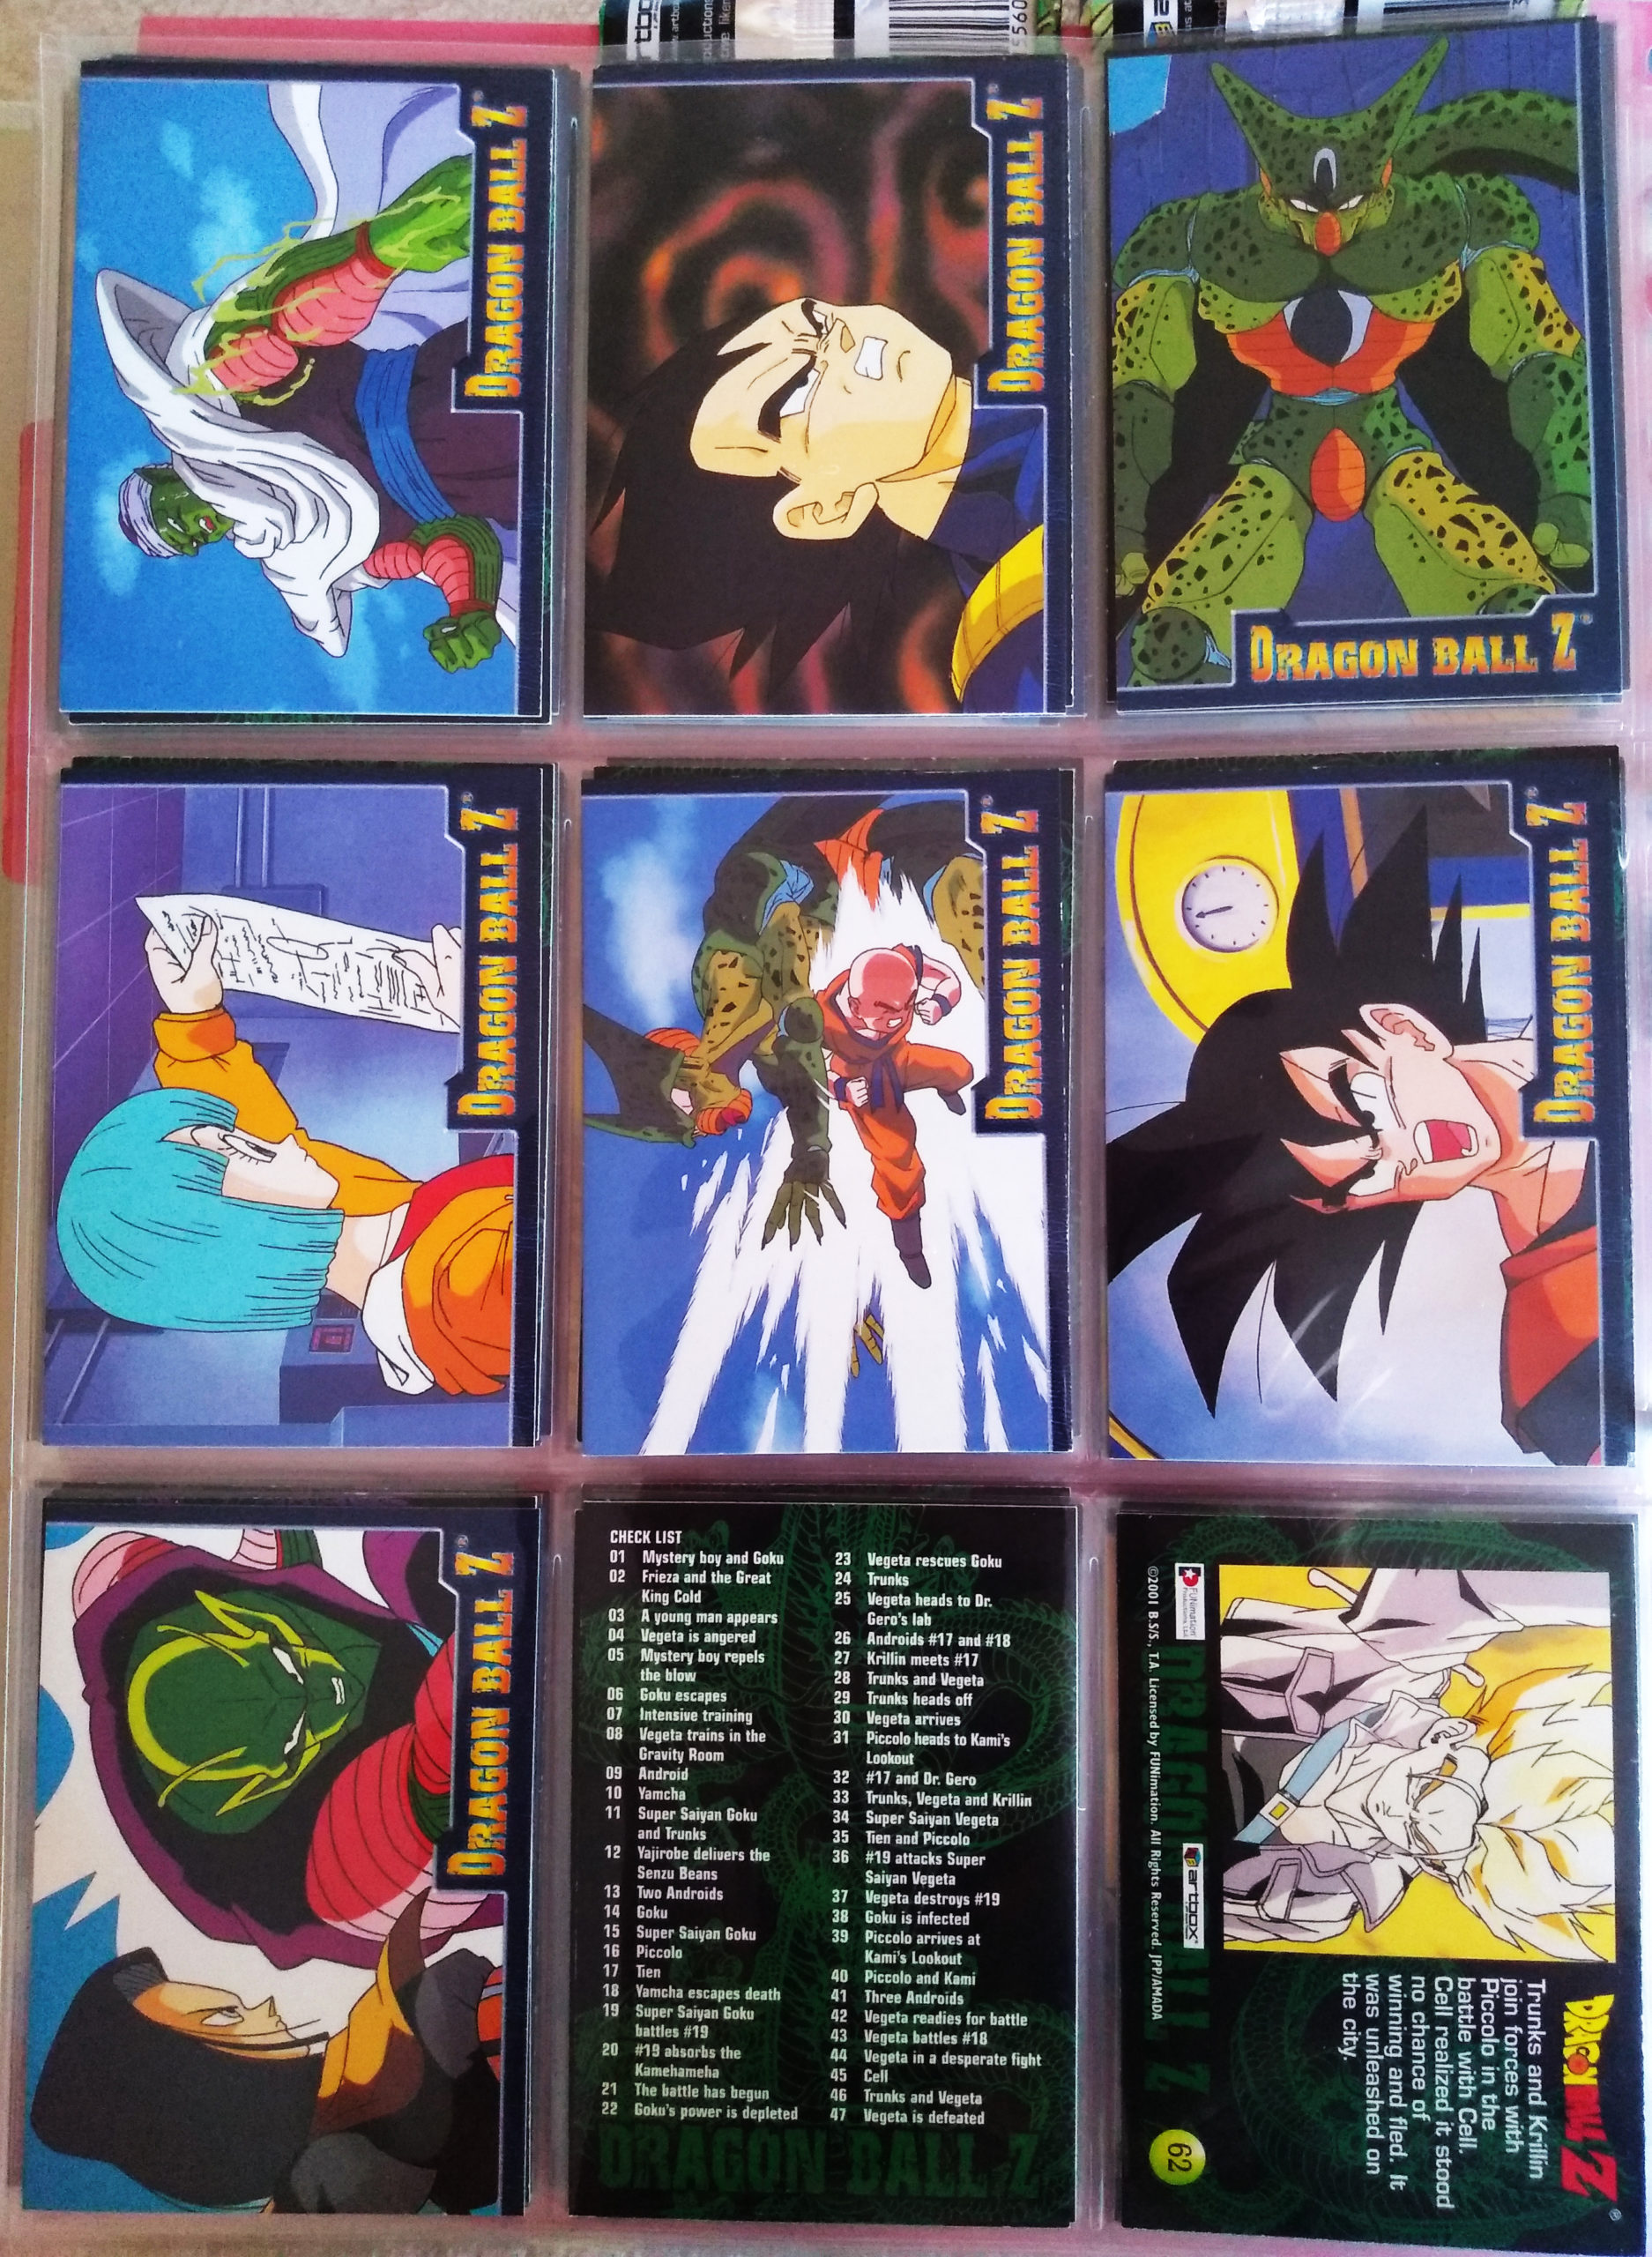 Dragonball Z Trading Cards Series 4 – Artbox – A BIT OF